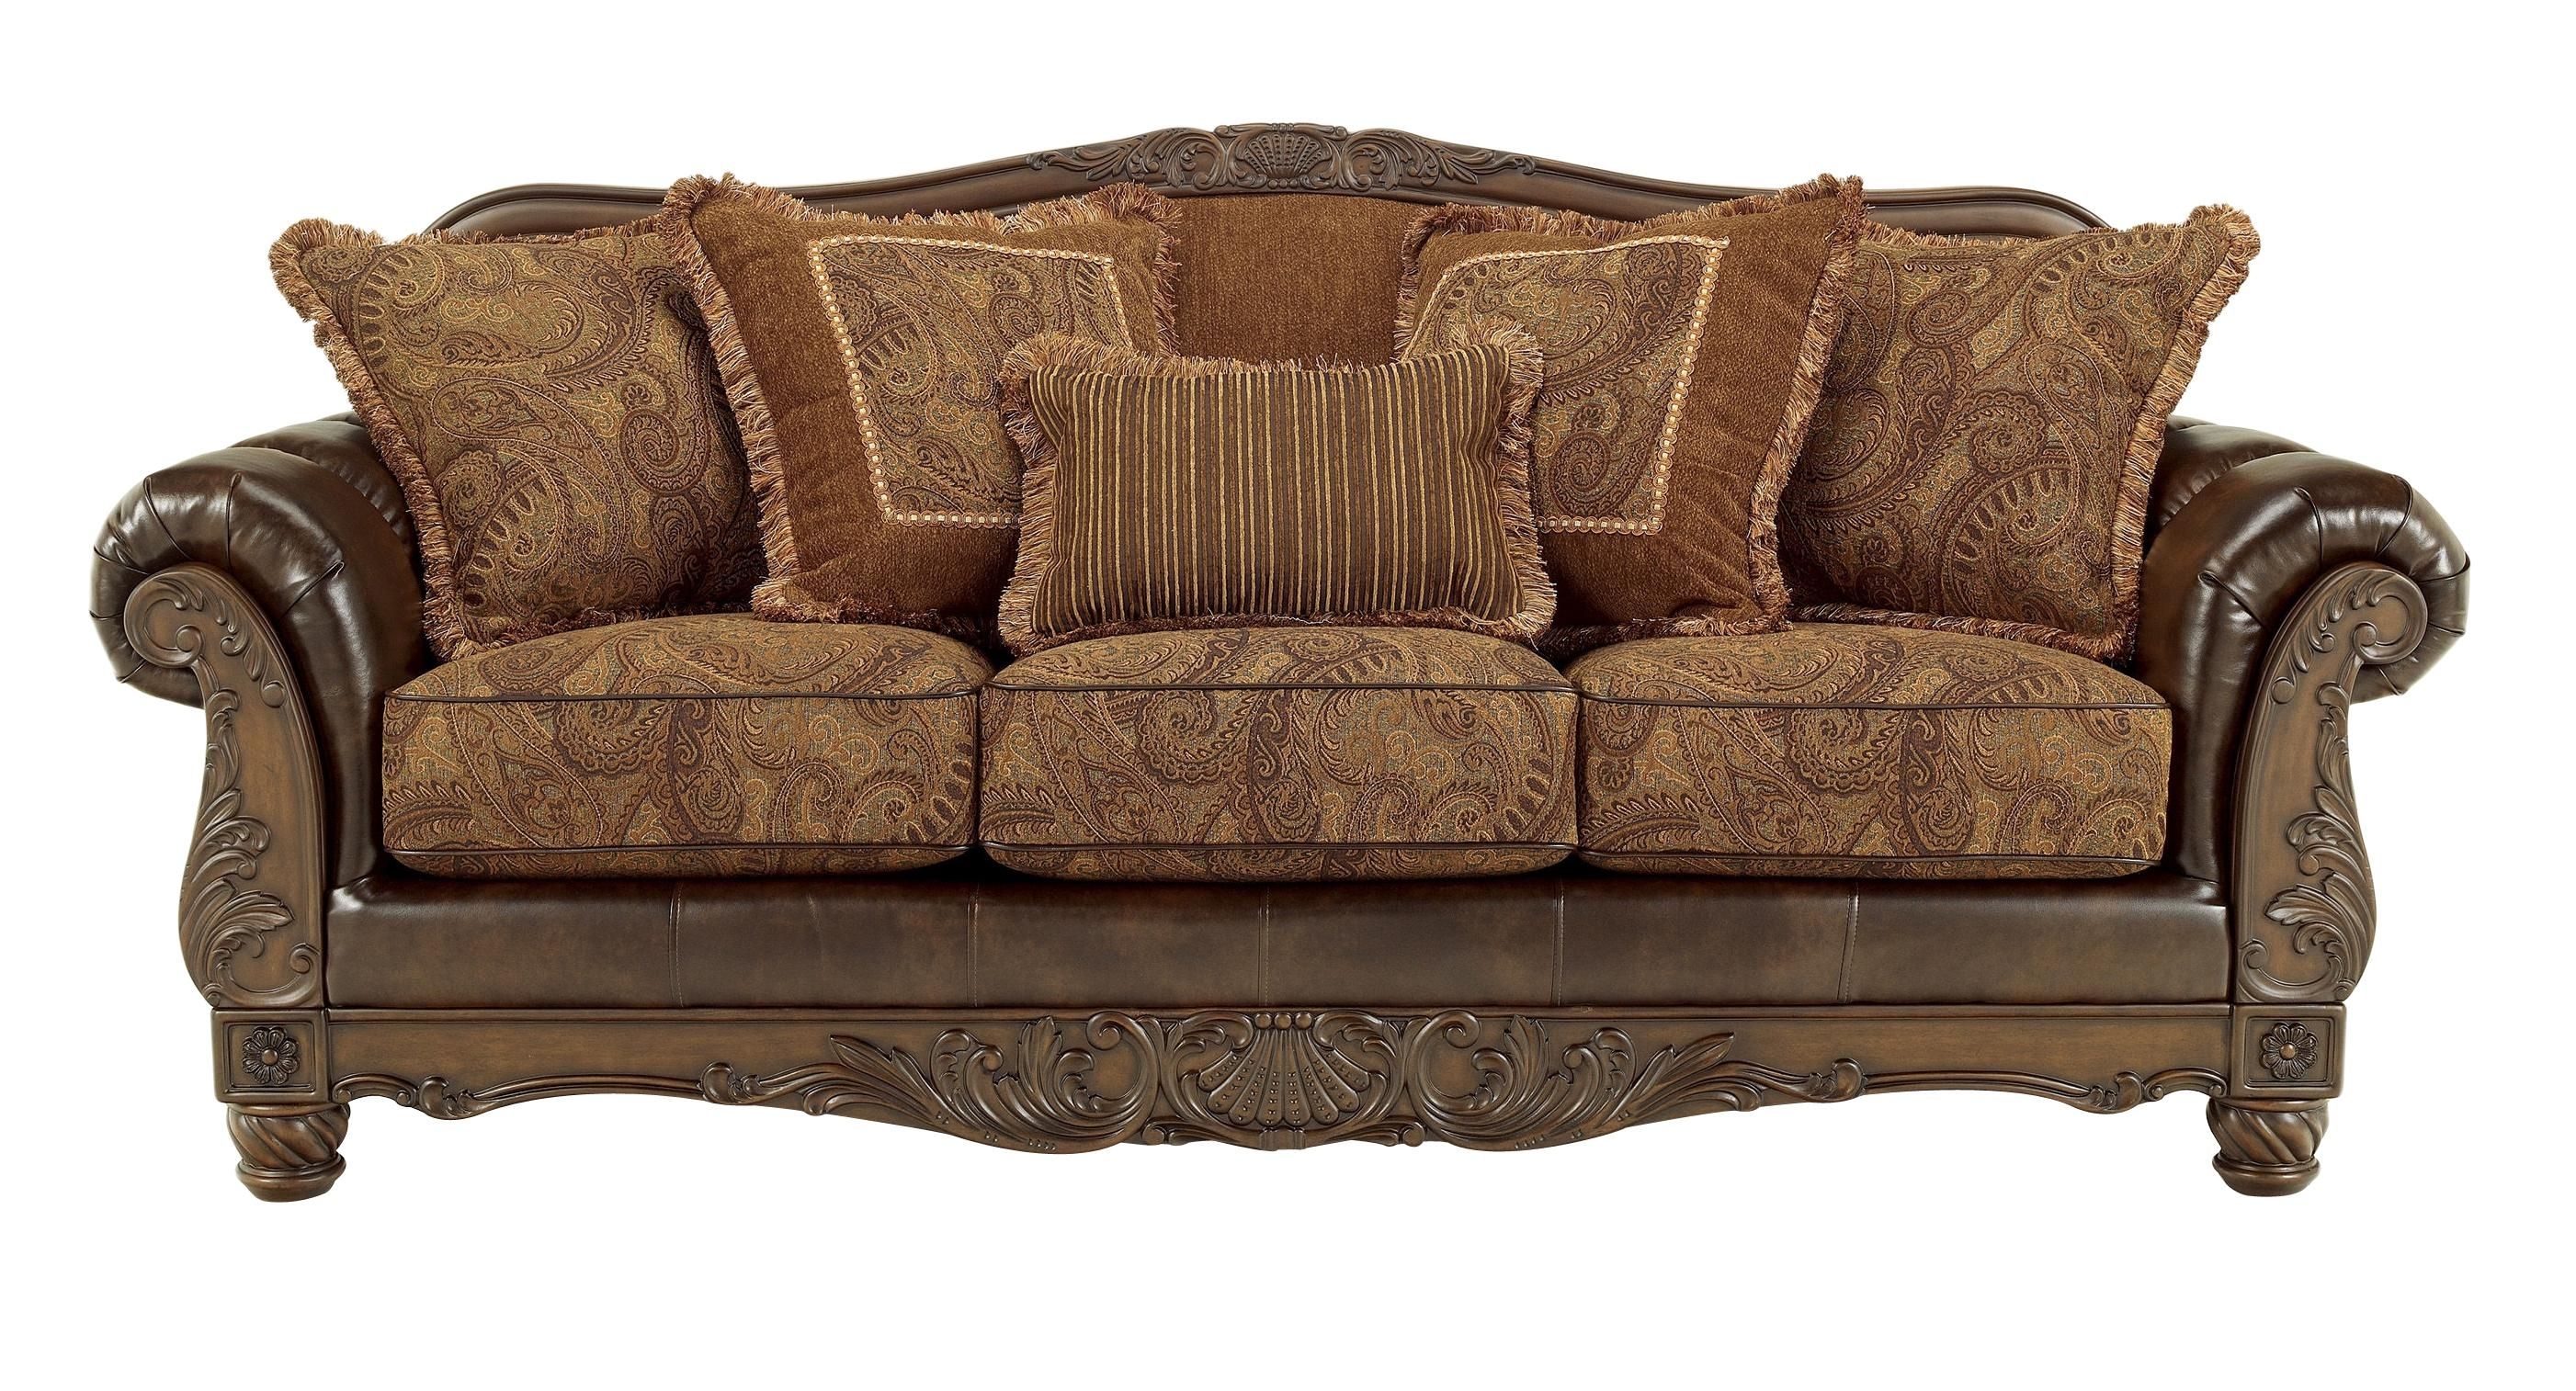 Fresco Durablend Traditional Antique Fabric Sofa | Living Rooms Intended For Antique Sofa Chairs (View 1 of 20)